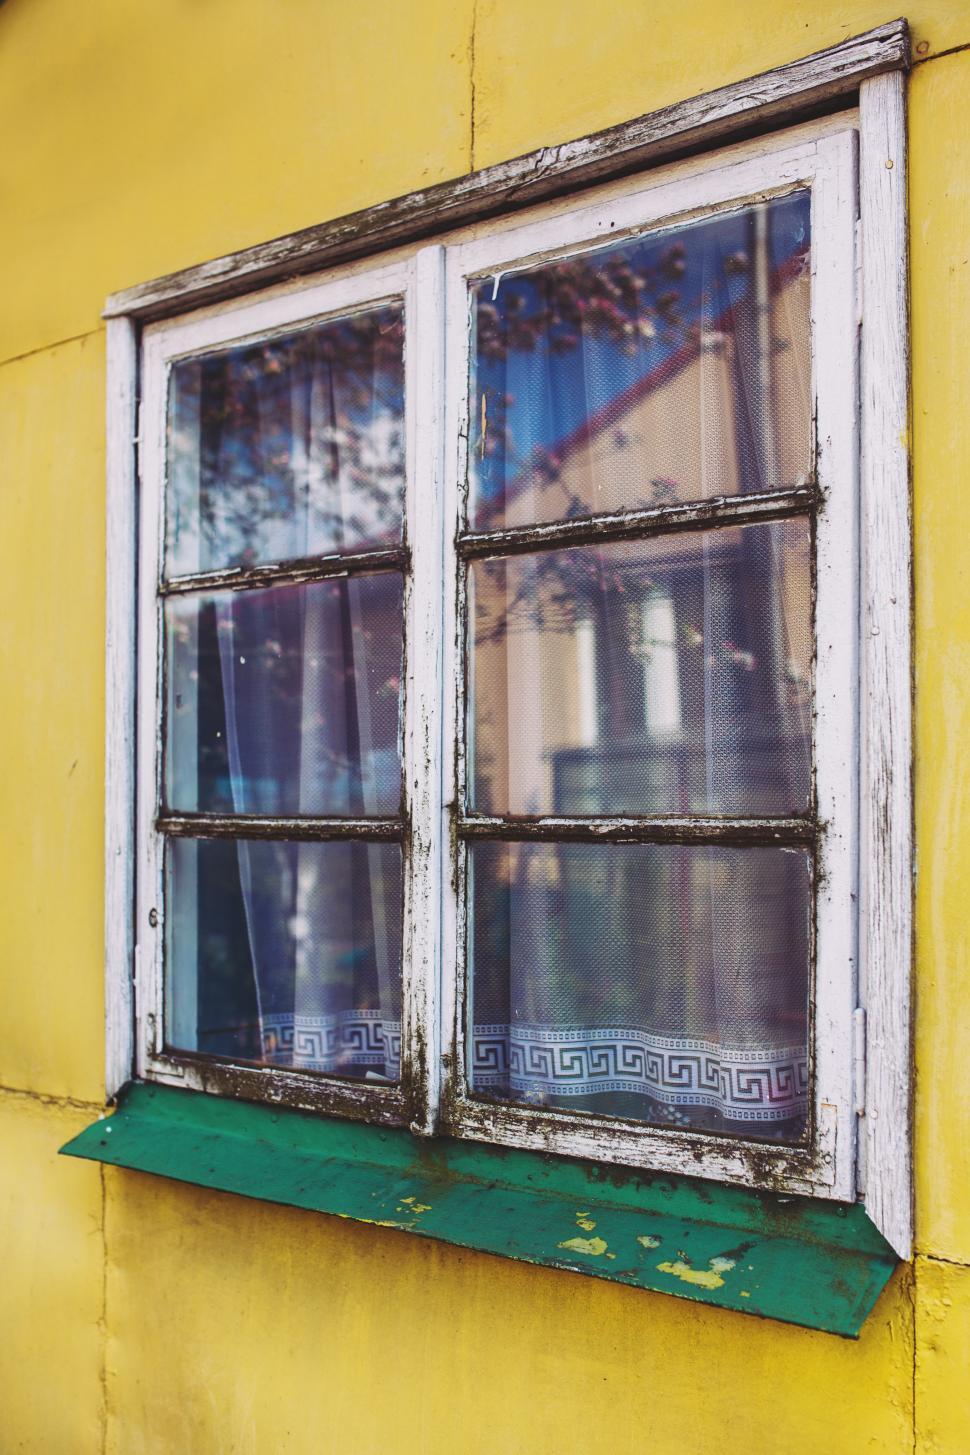 Free Image of Yellow Building With Window and Curtain 